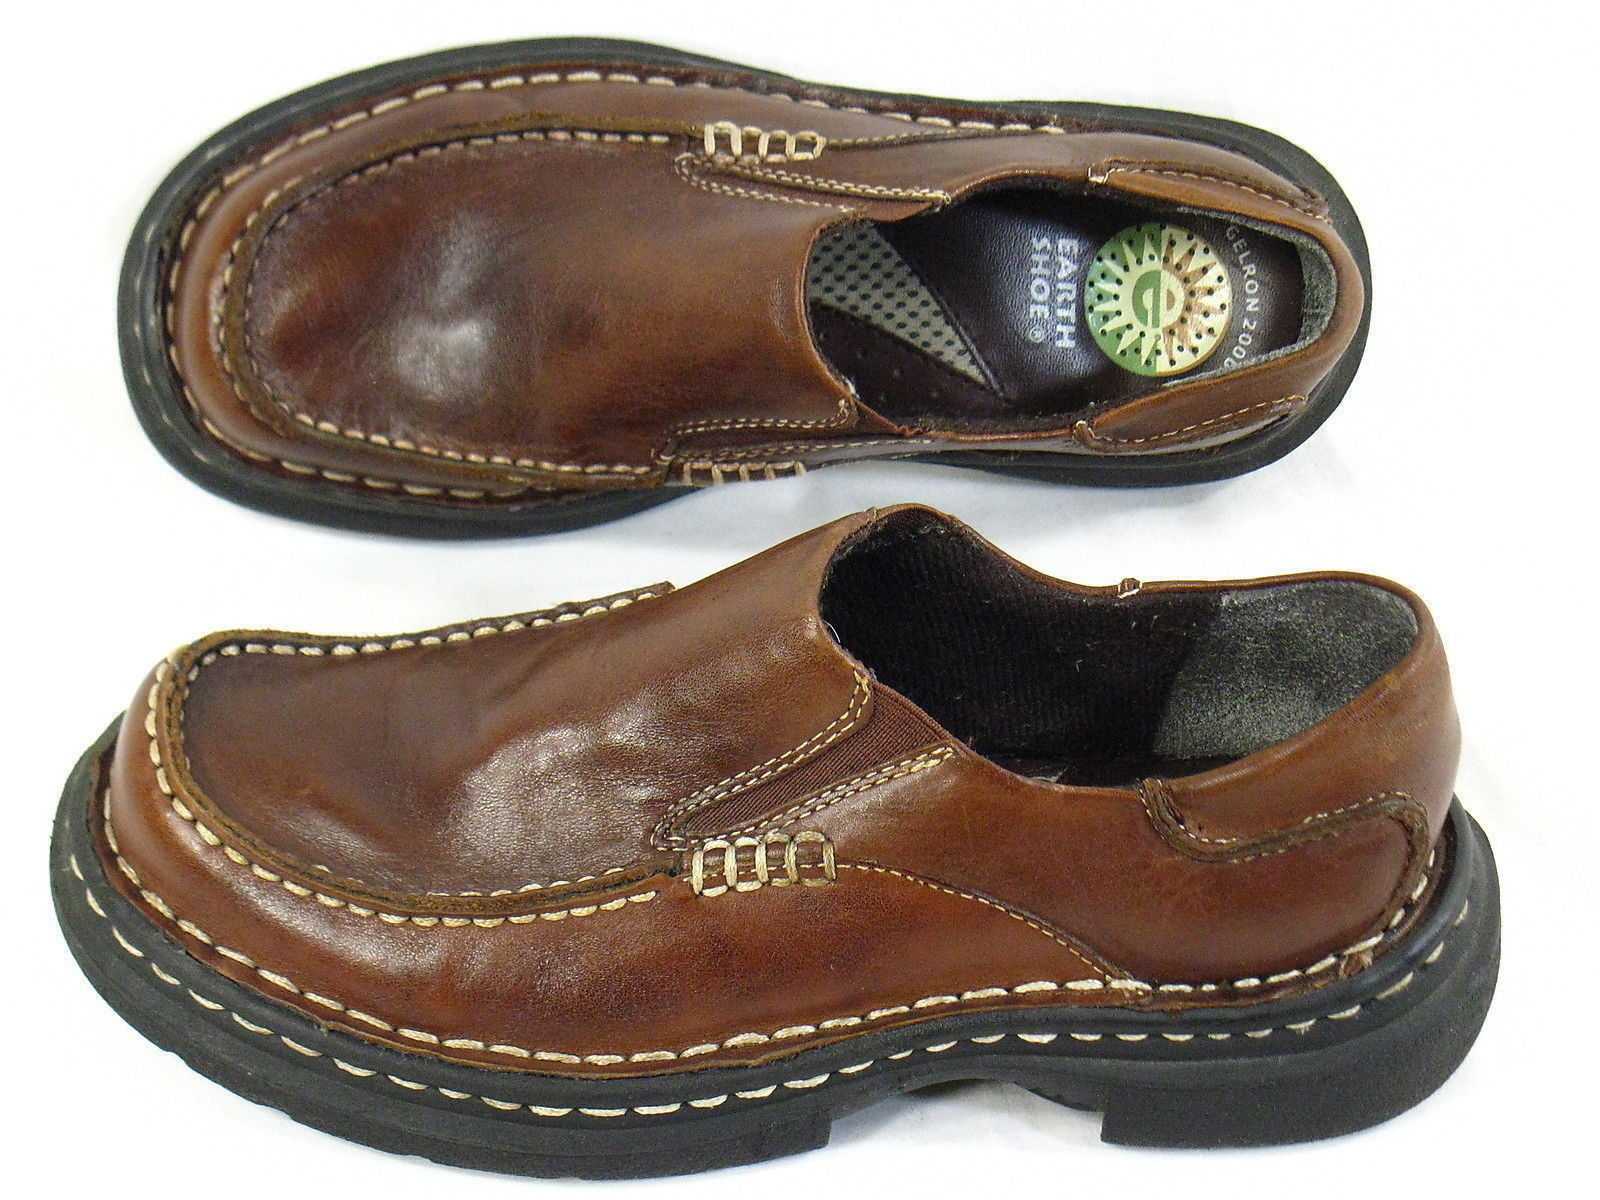 Earth Shoes Gelron Women's Loafers Leather Brown Size 6 and 6.5 